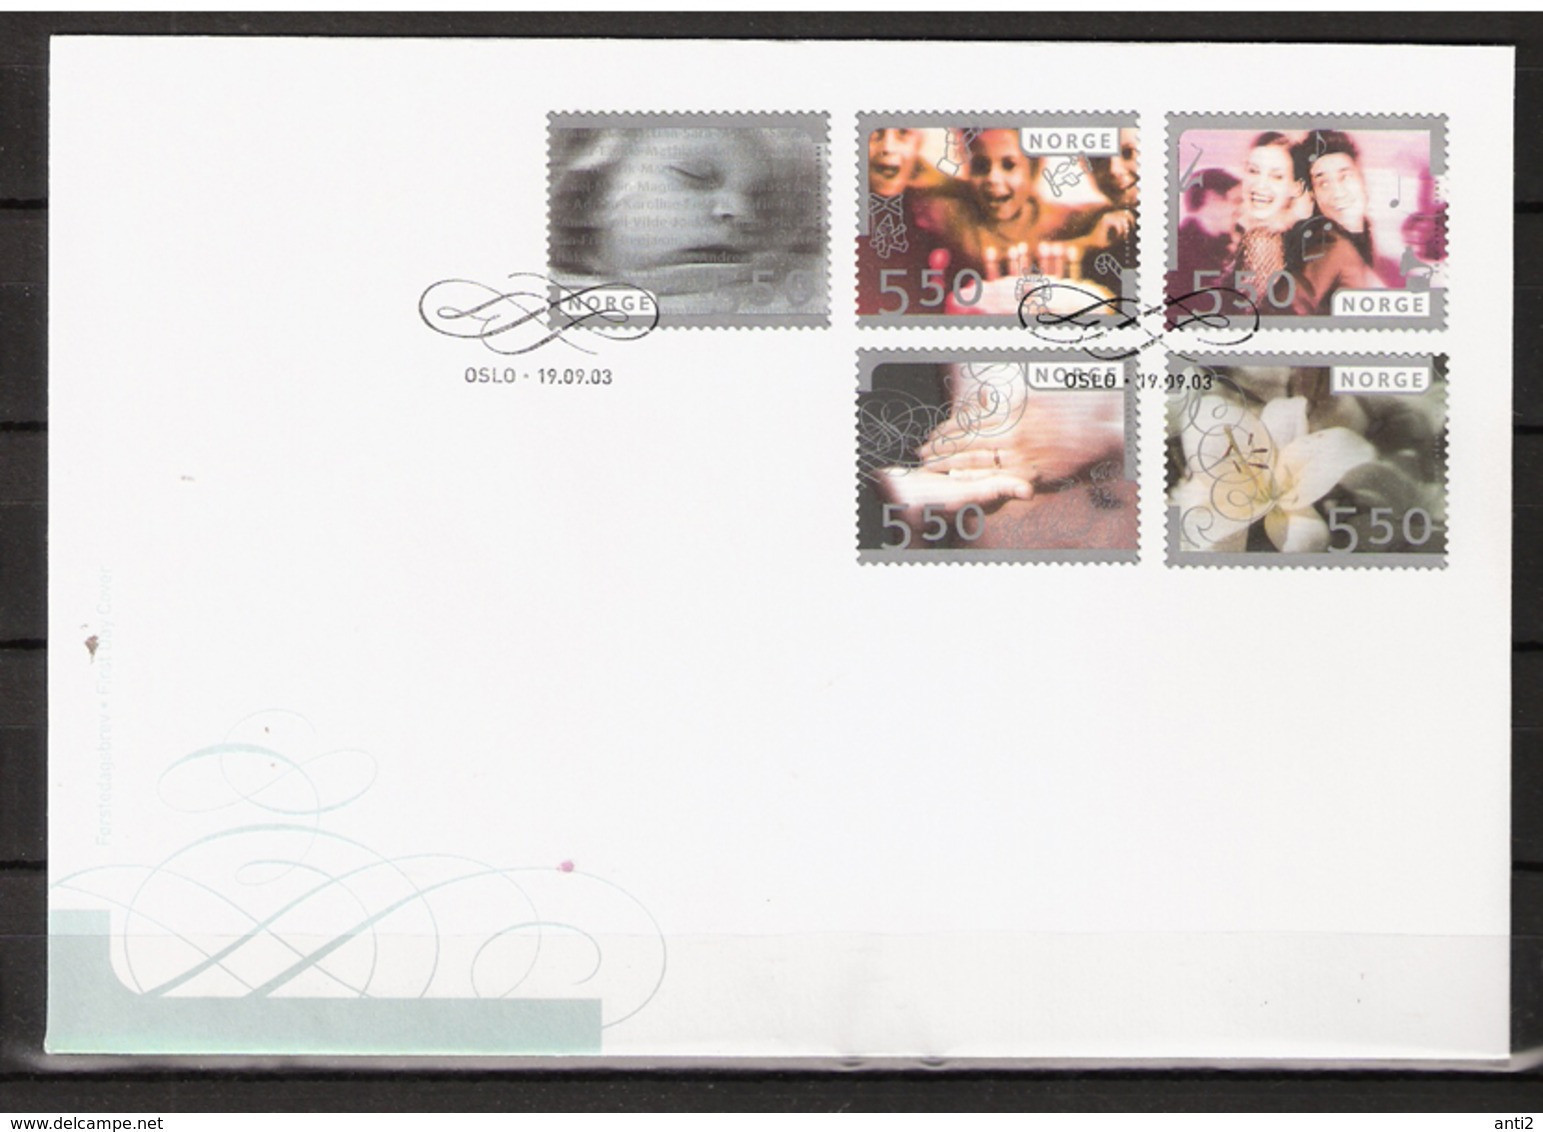 Norway Norge  2003 Greeting Stamps  Mi 1474-1478 FDC - Storia Postale